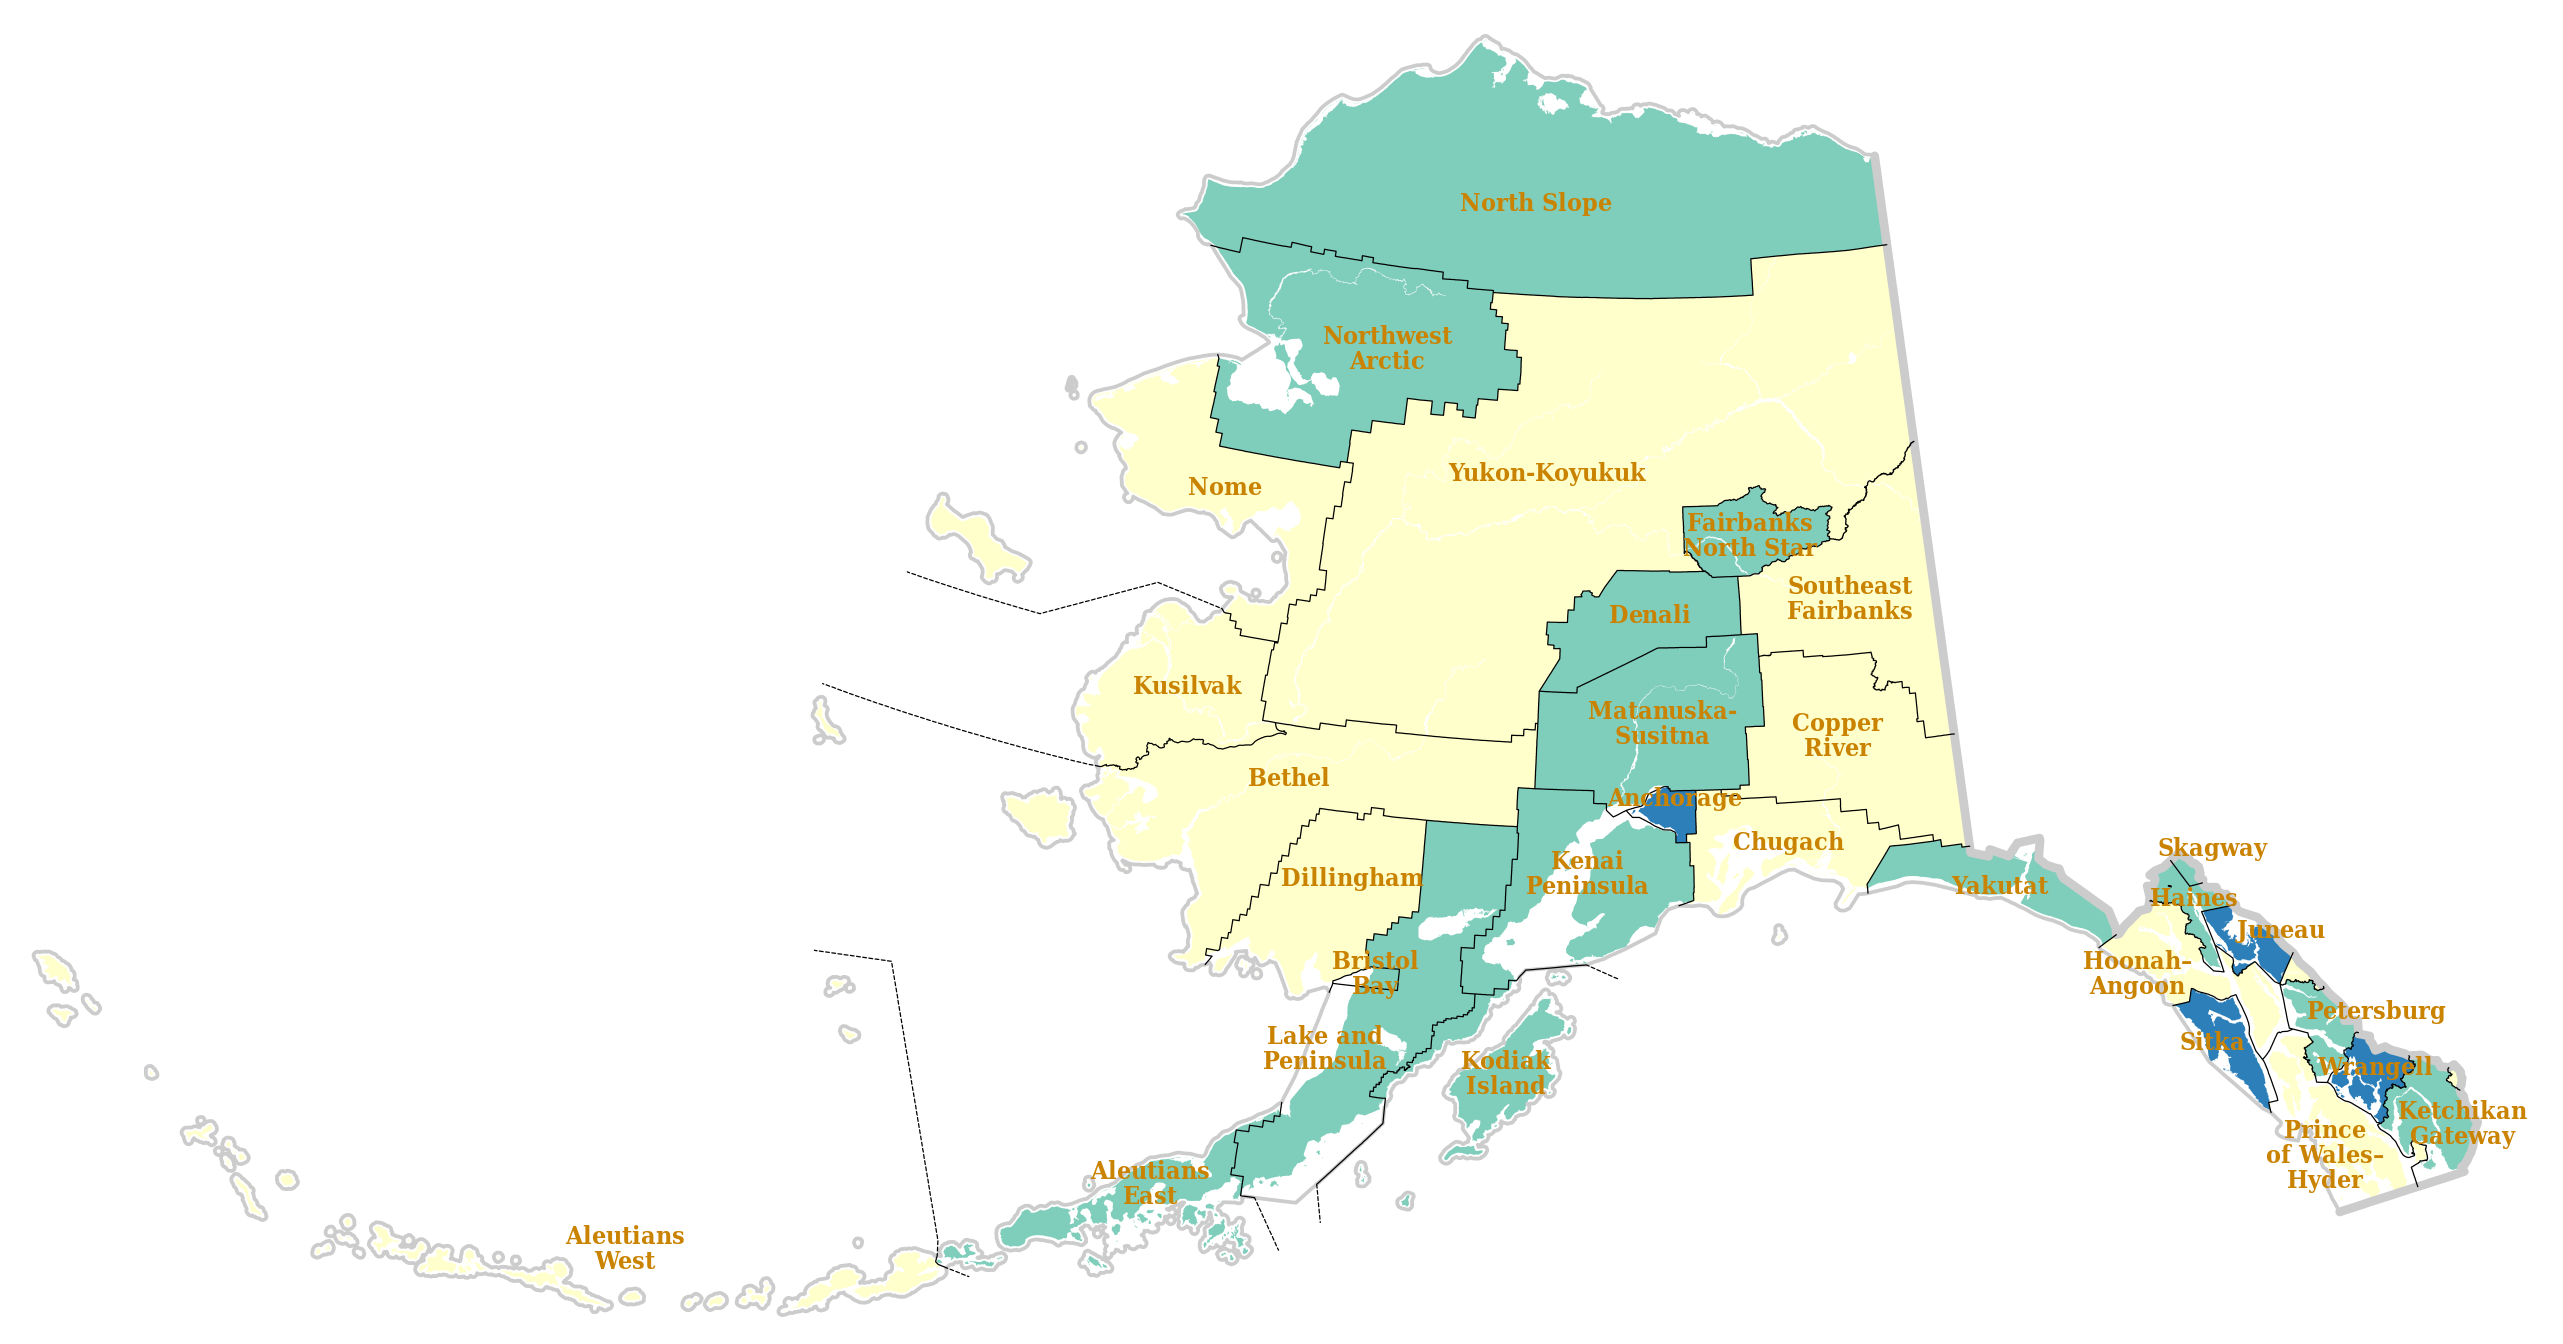 2563px-Alaska_boroughs_and_census_areas_2019.svg.png